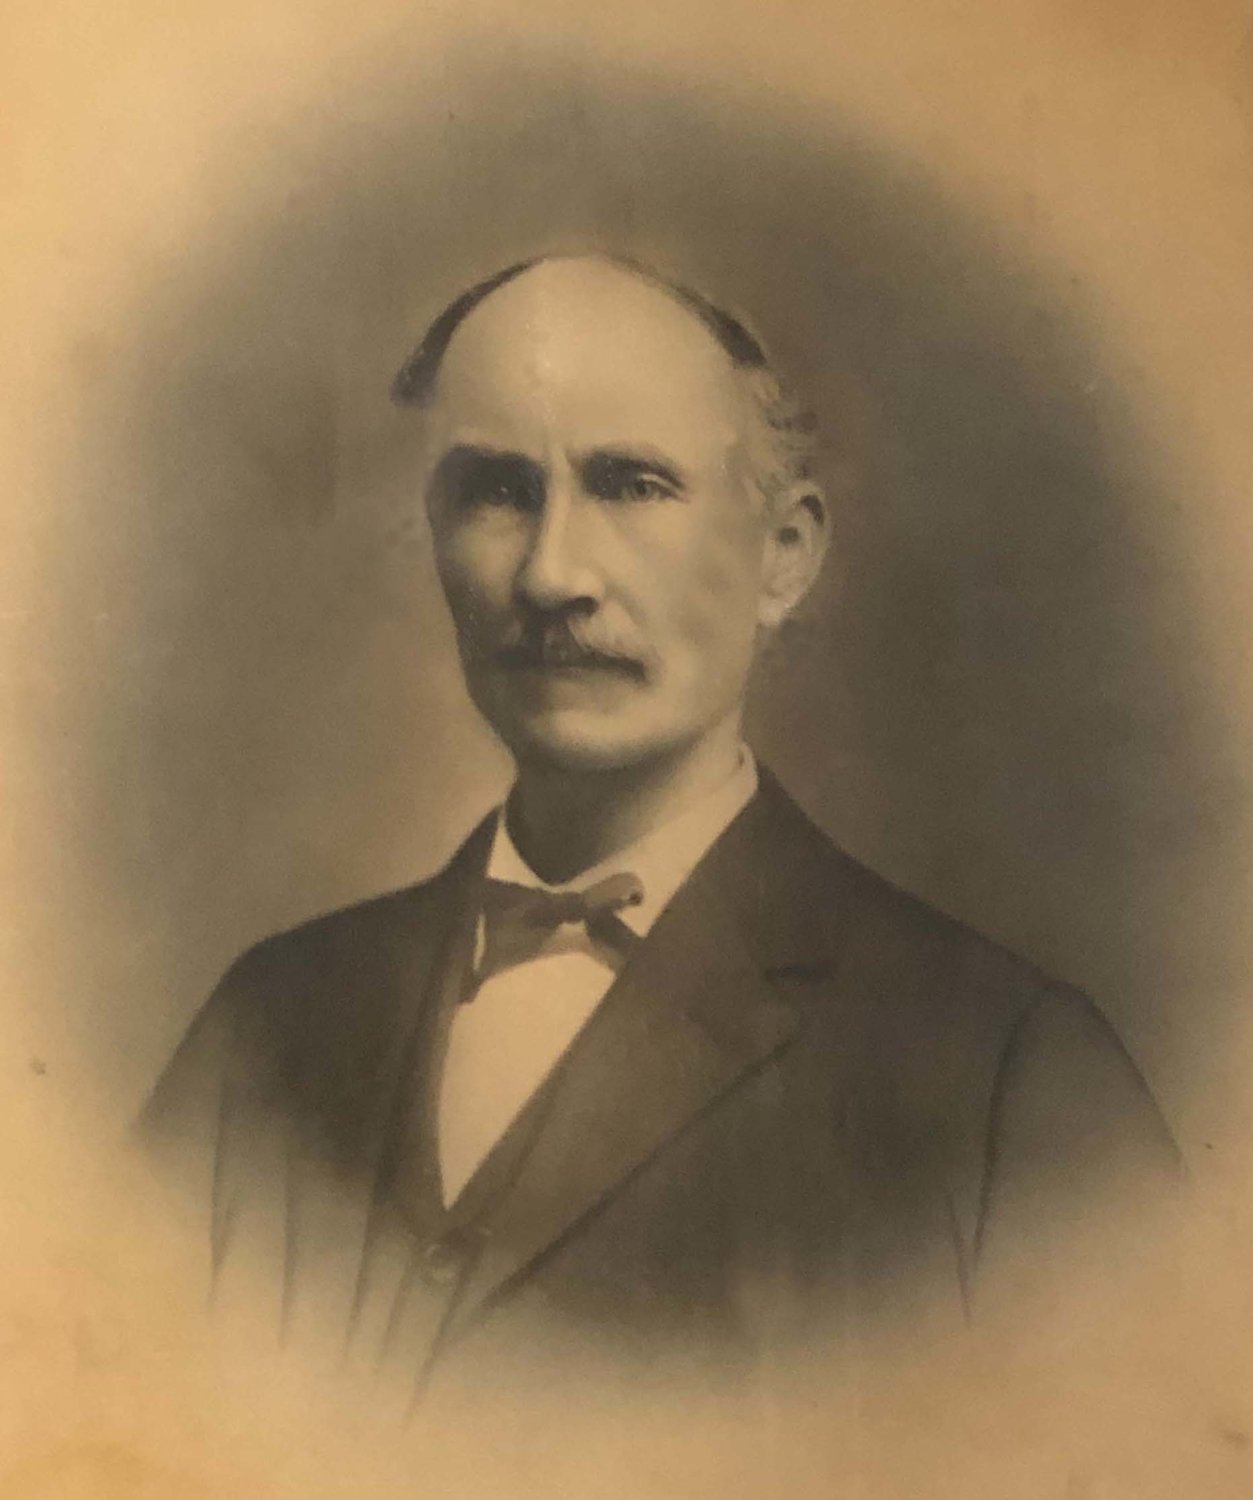 J.U. Searcy – First Wood County School Superintendent